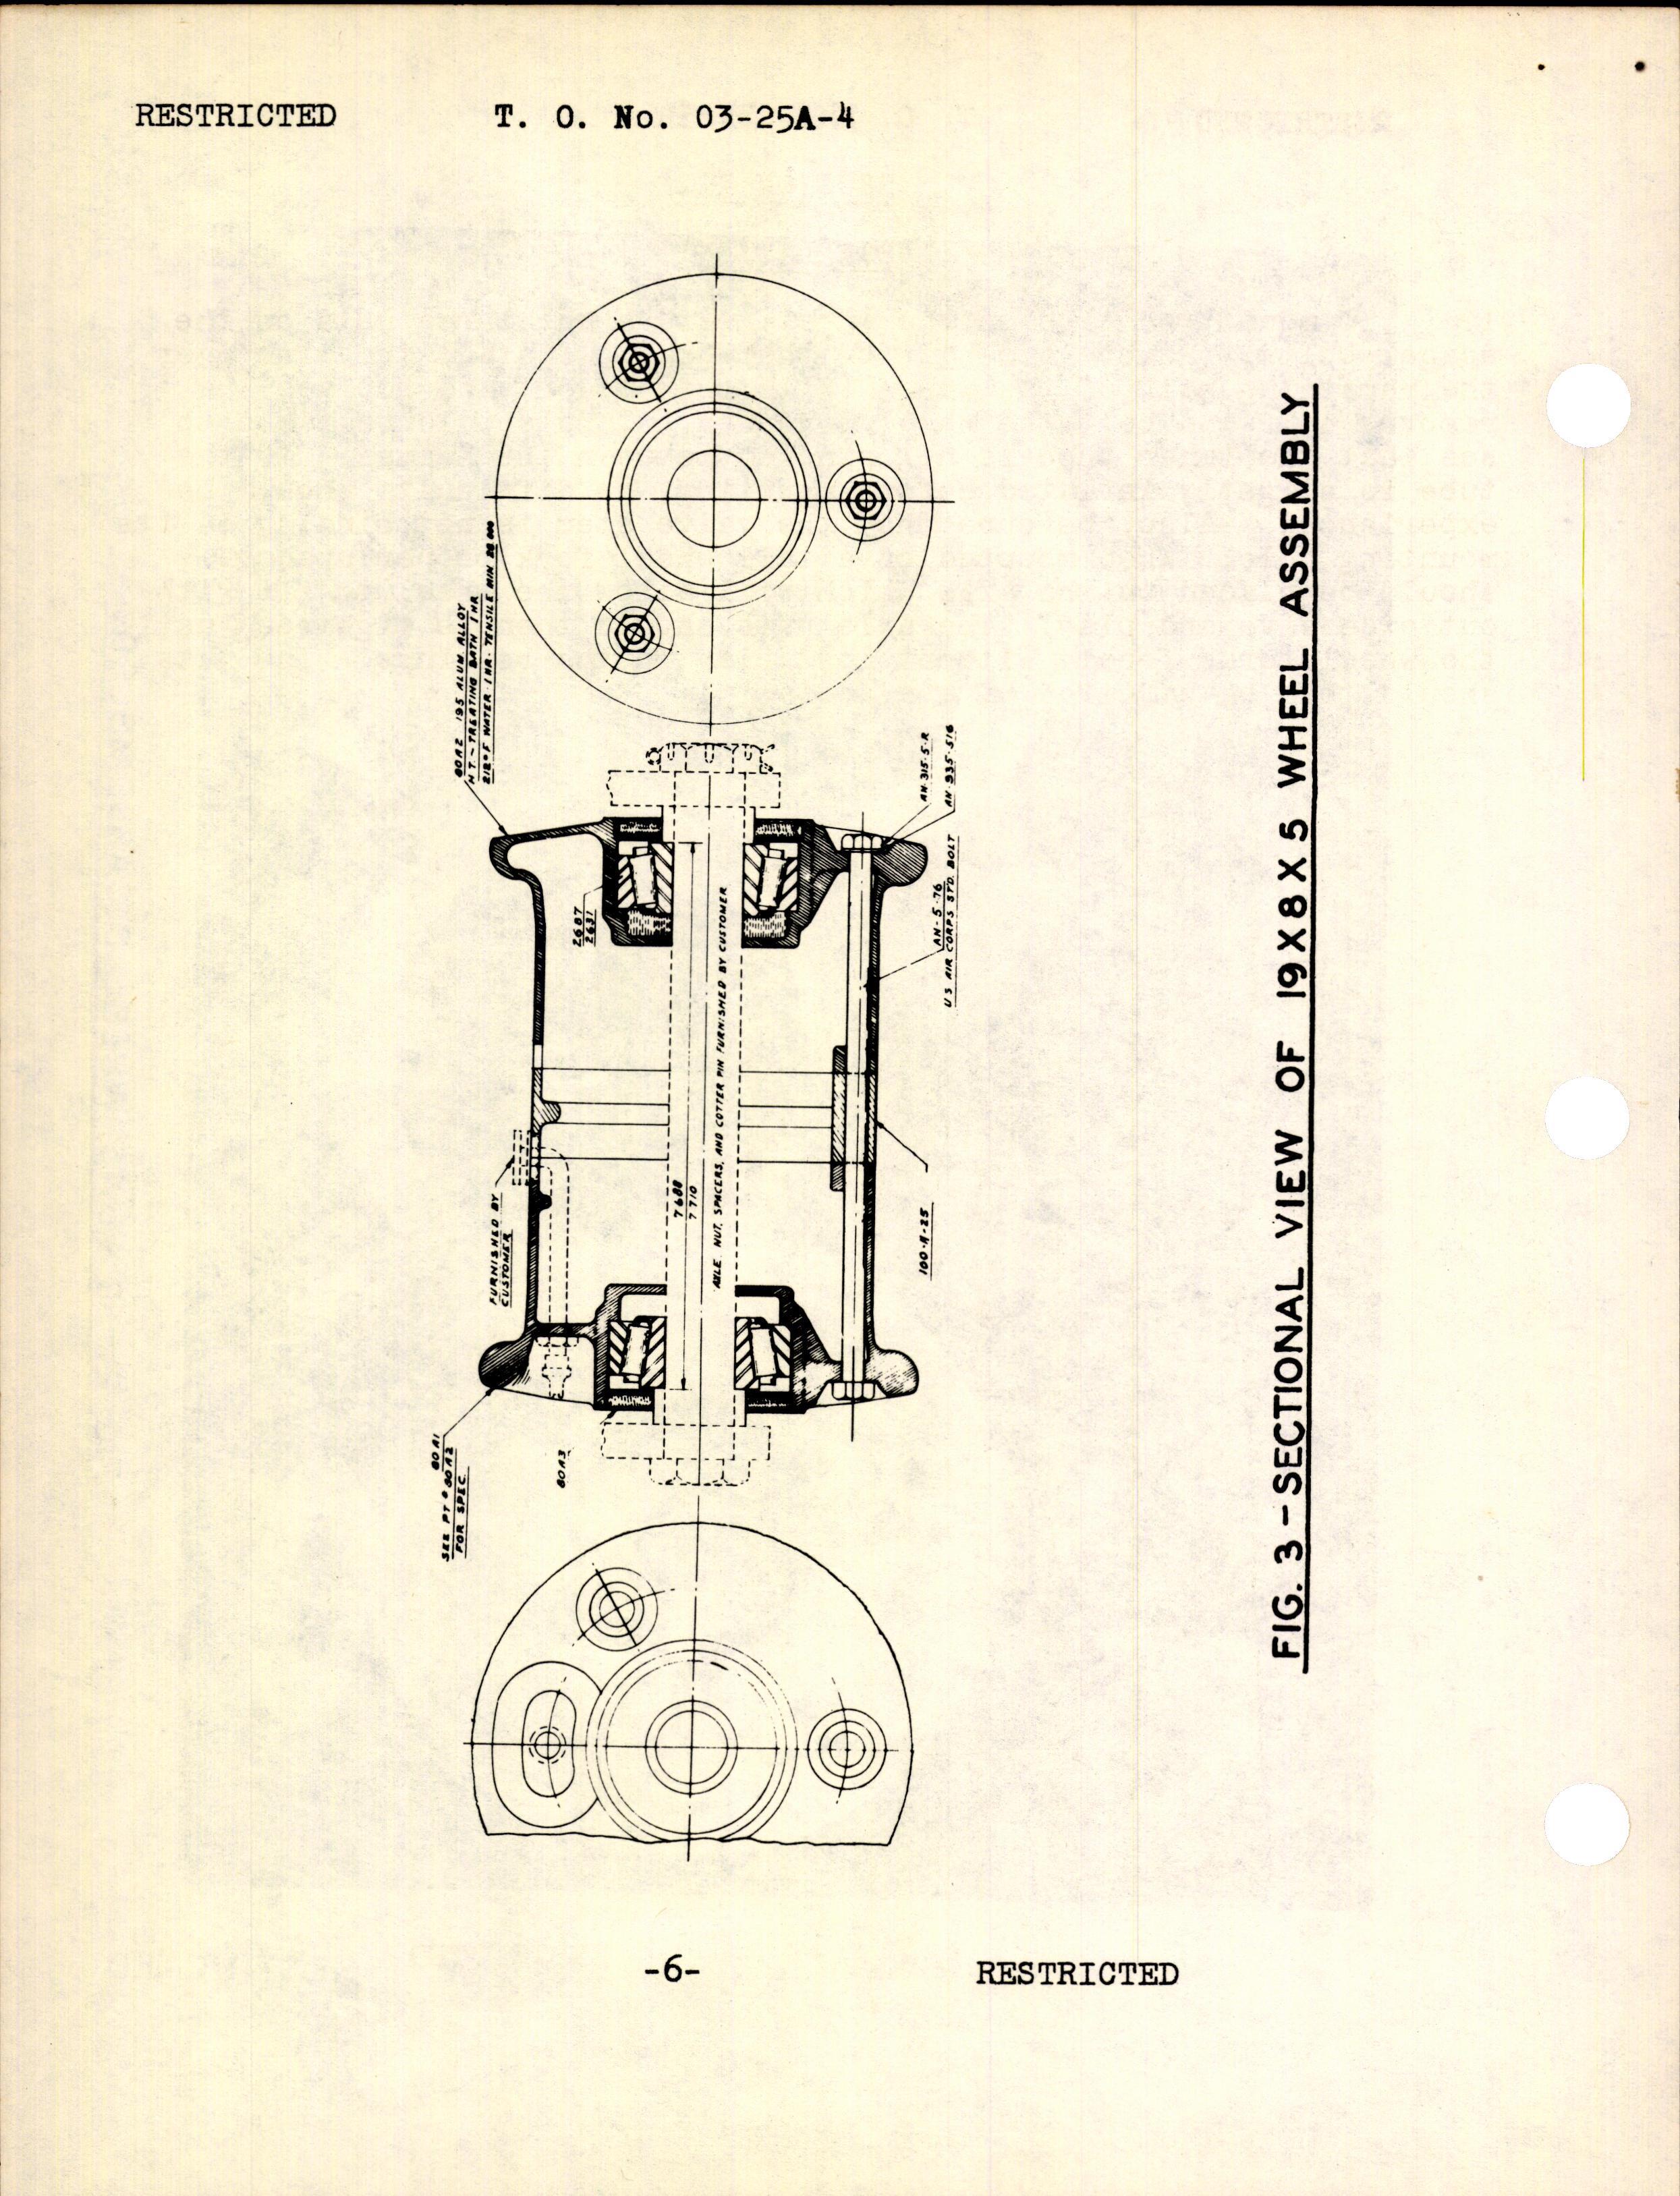 Sample page 8 from AirCorps Library document: Handbook of Instructions with Parts Catalog for Smooth Contour Tail Wheels